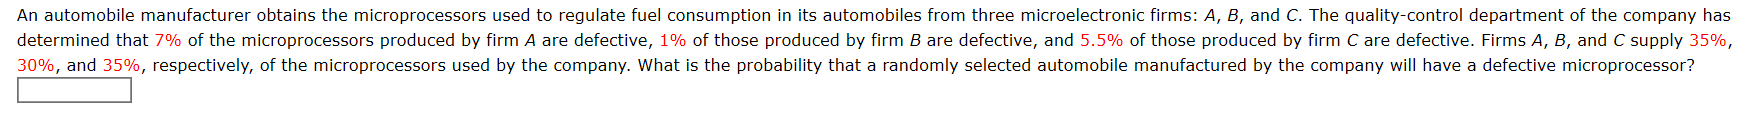 An automobile manufacturer obtains the microprocessors used to regulate fuel consumption in its automobiles from three microelectronic firms: A, B, and C. The quality-control department of the company has
determined that 7% of the microprocessors produced by firm A are defective, 1% of those produced by firm B are defective, and 5.5% of those produced by firm C are defective. Firms A, B, and C supply 35%,
30%, and 35%, respectively, of the microprocessors used by the company. What is the probability that a randomly selected automobile manufactured by the company will have a defective microprocessor?
